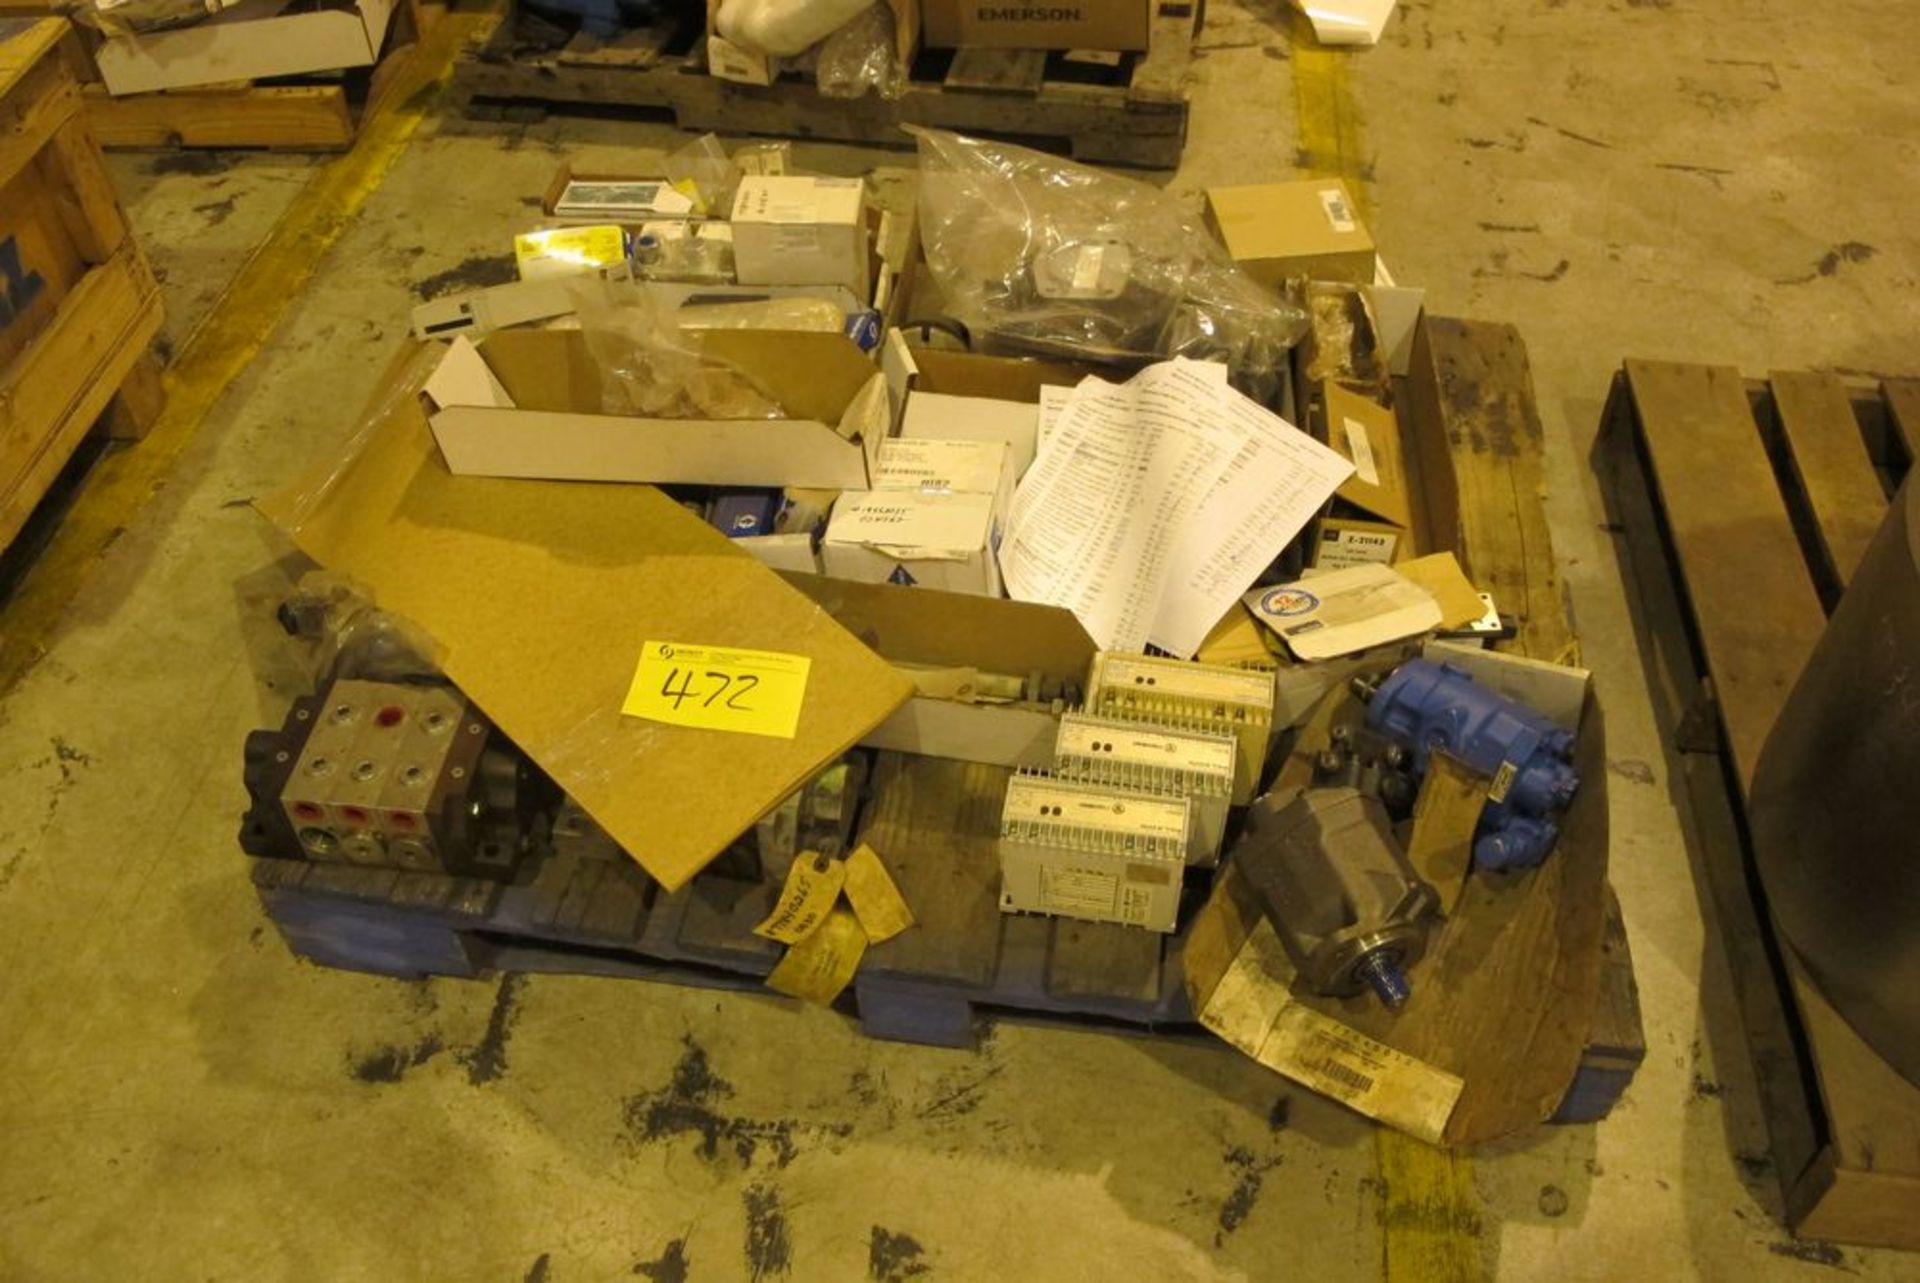 LOT OF 8 PALLETS OF REFINER PARTS (WHSE 52) - Image 8 of 9